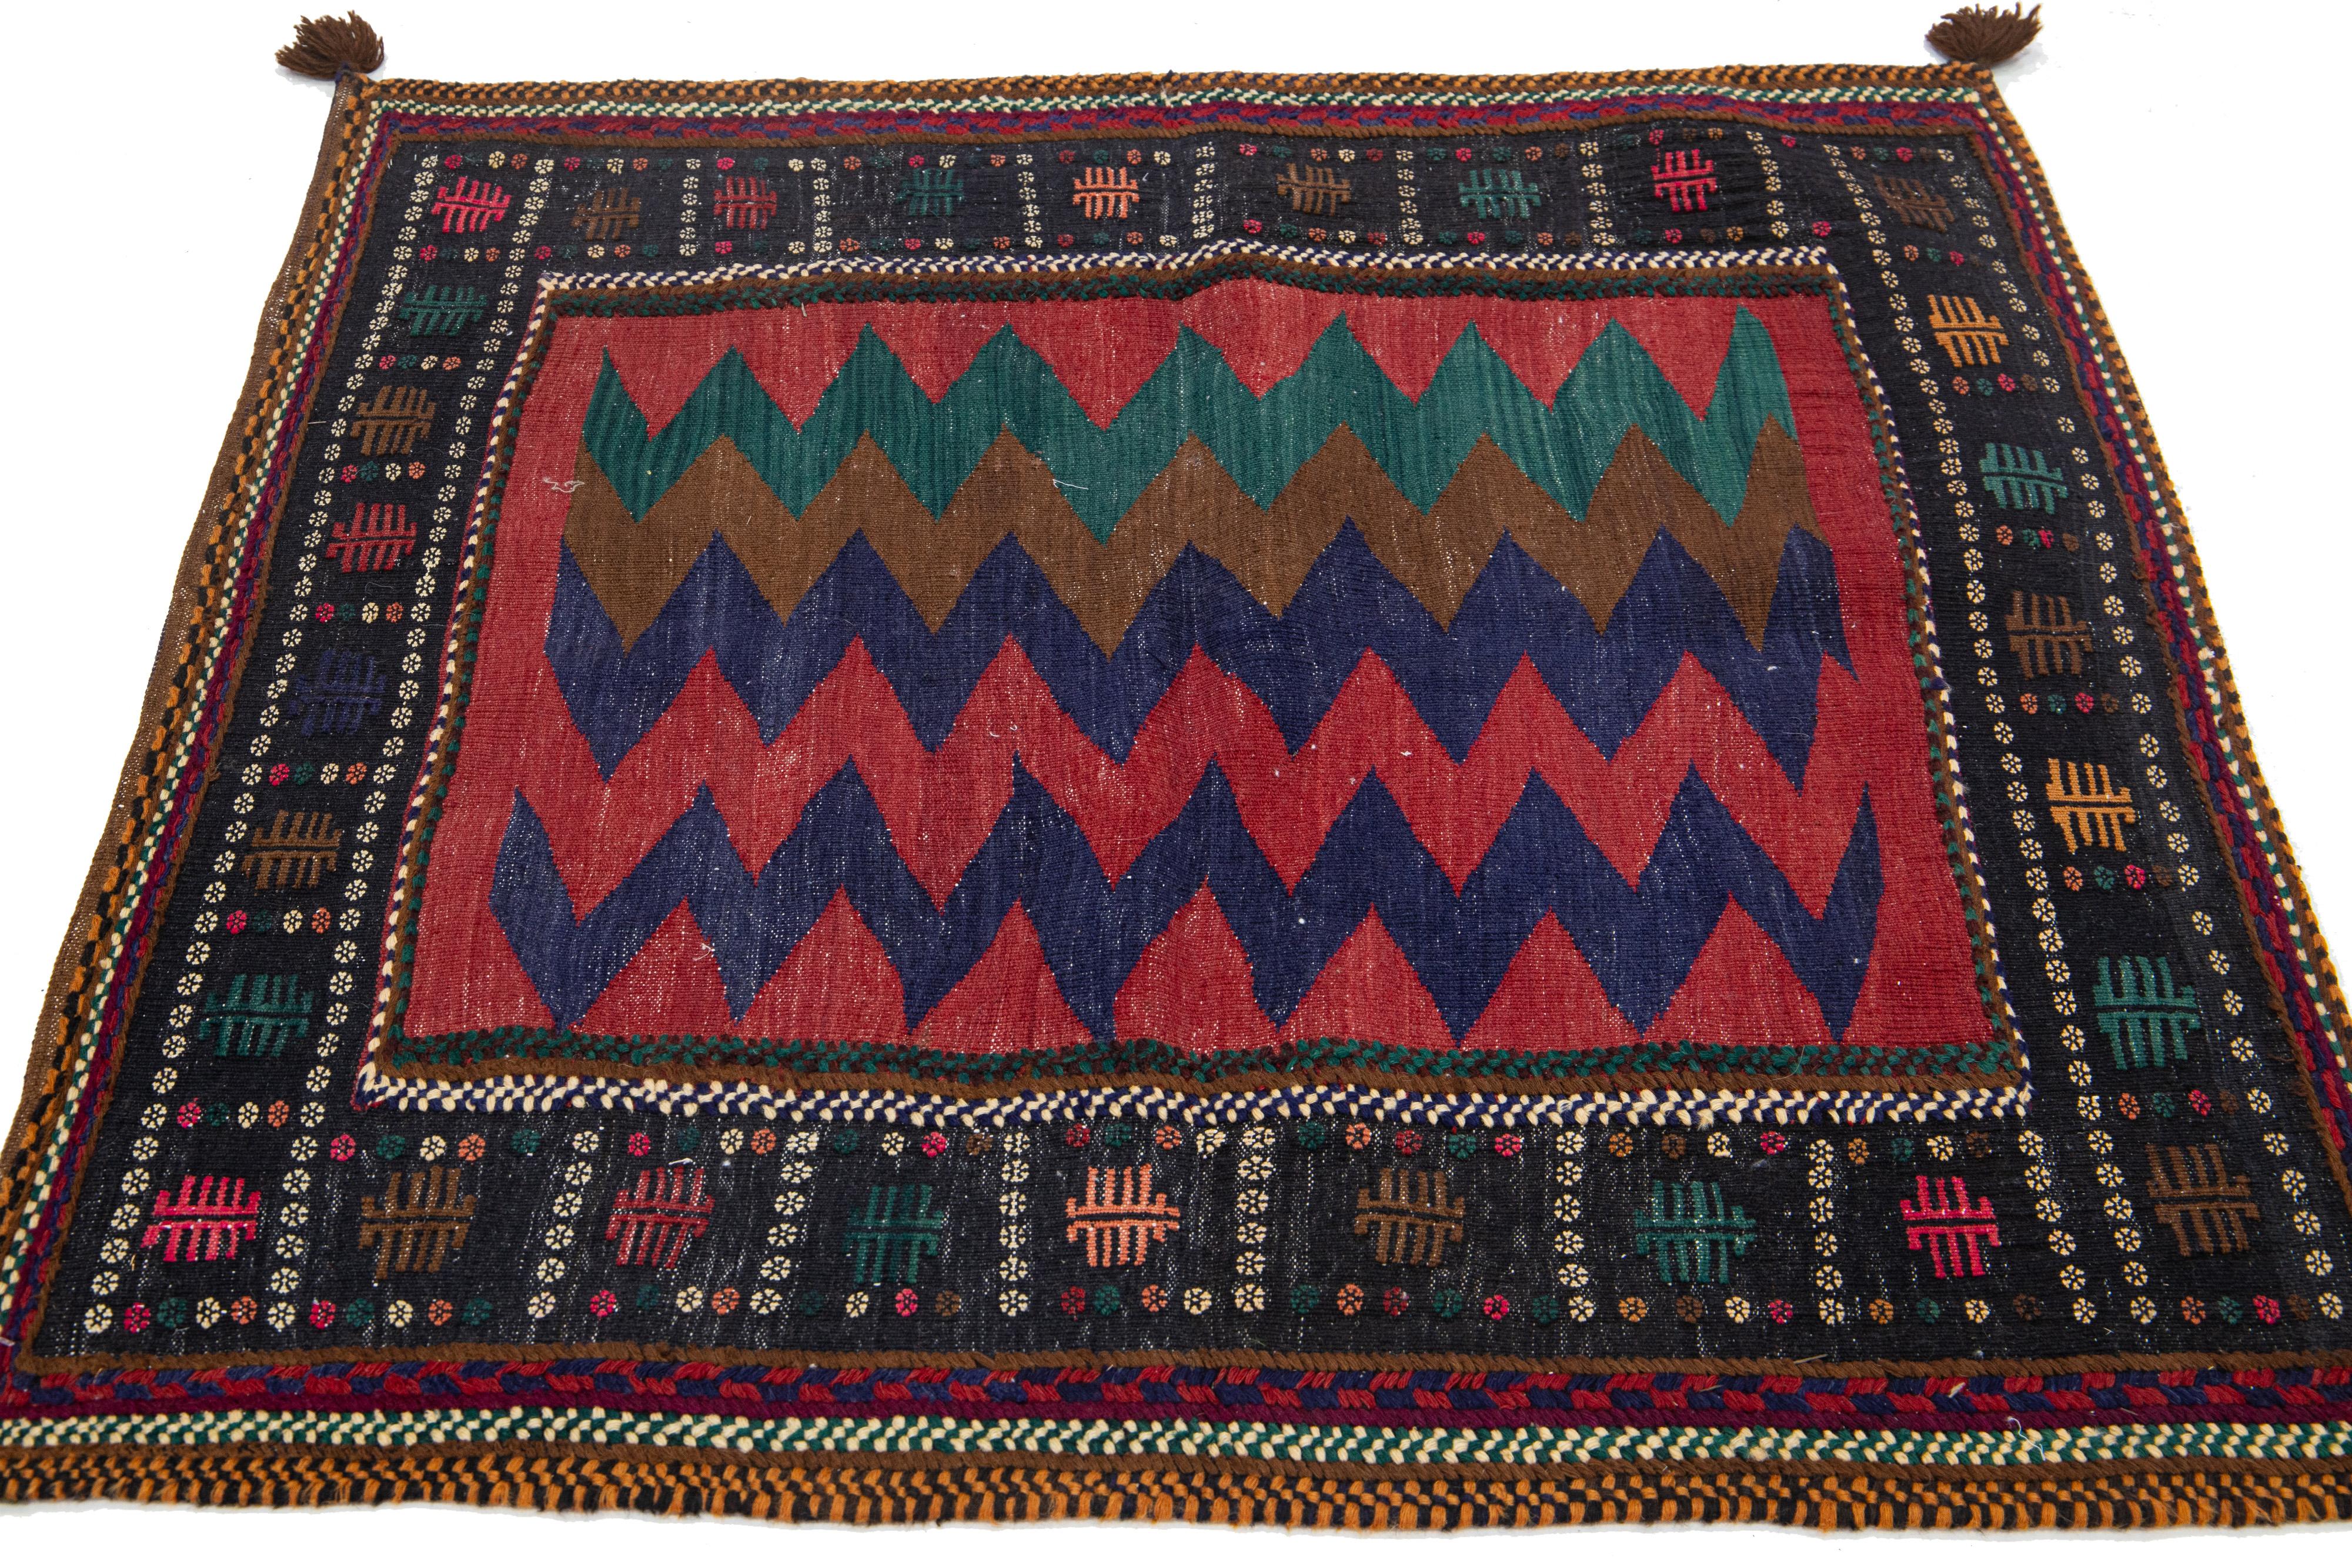 1960s Vintage Tribal Persian Shiraz Blue Wool Rug With Multicolor Accents In Excellent Condition For Sale In Norwalk, CT